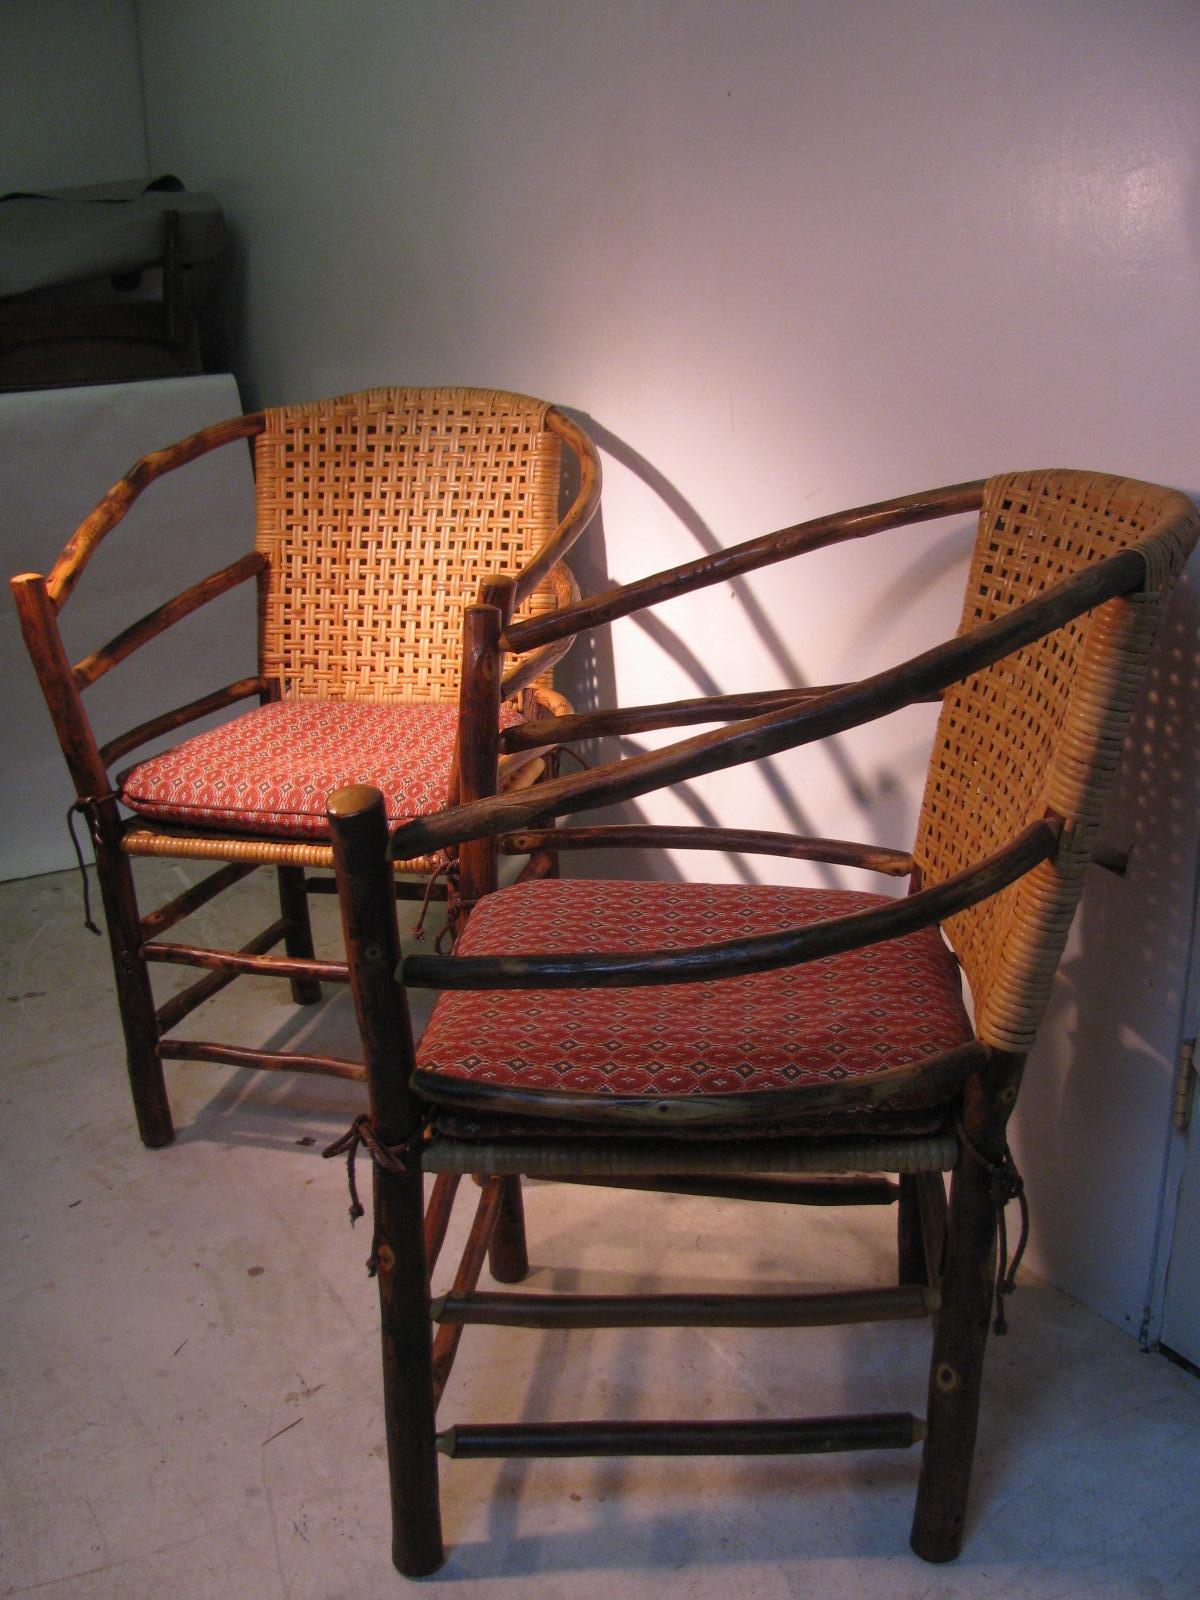 reed chair seats